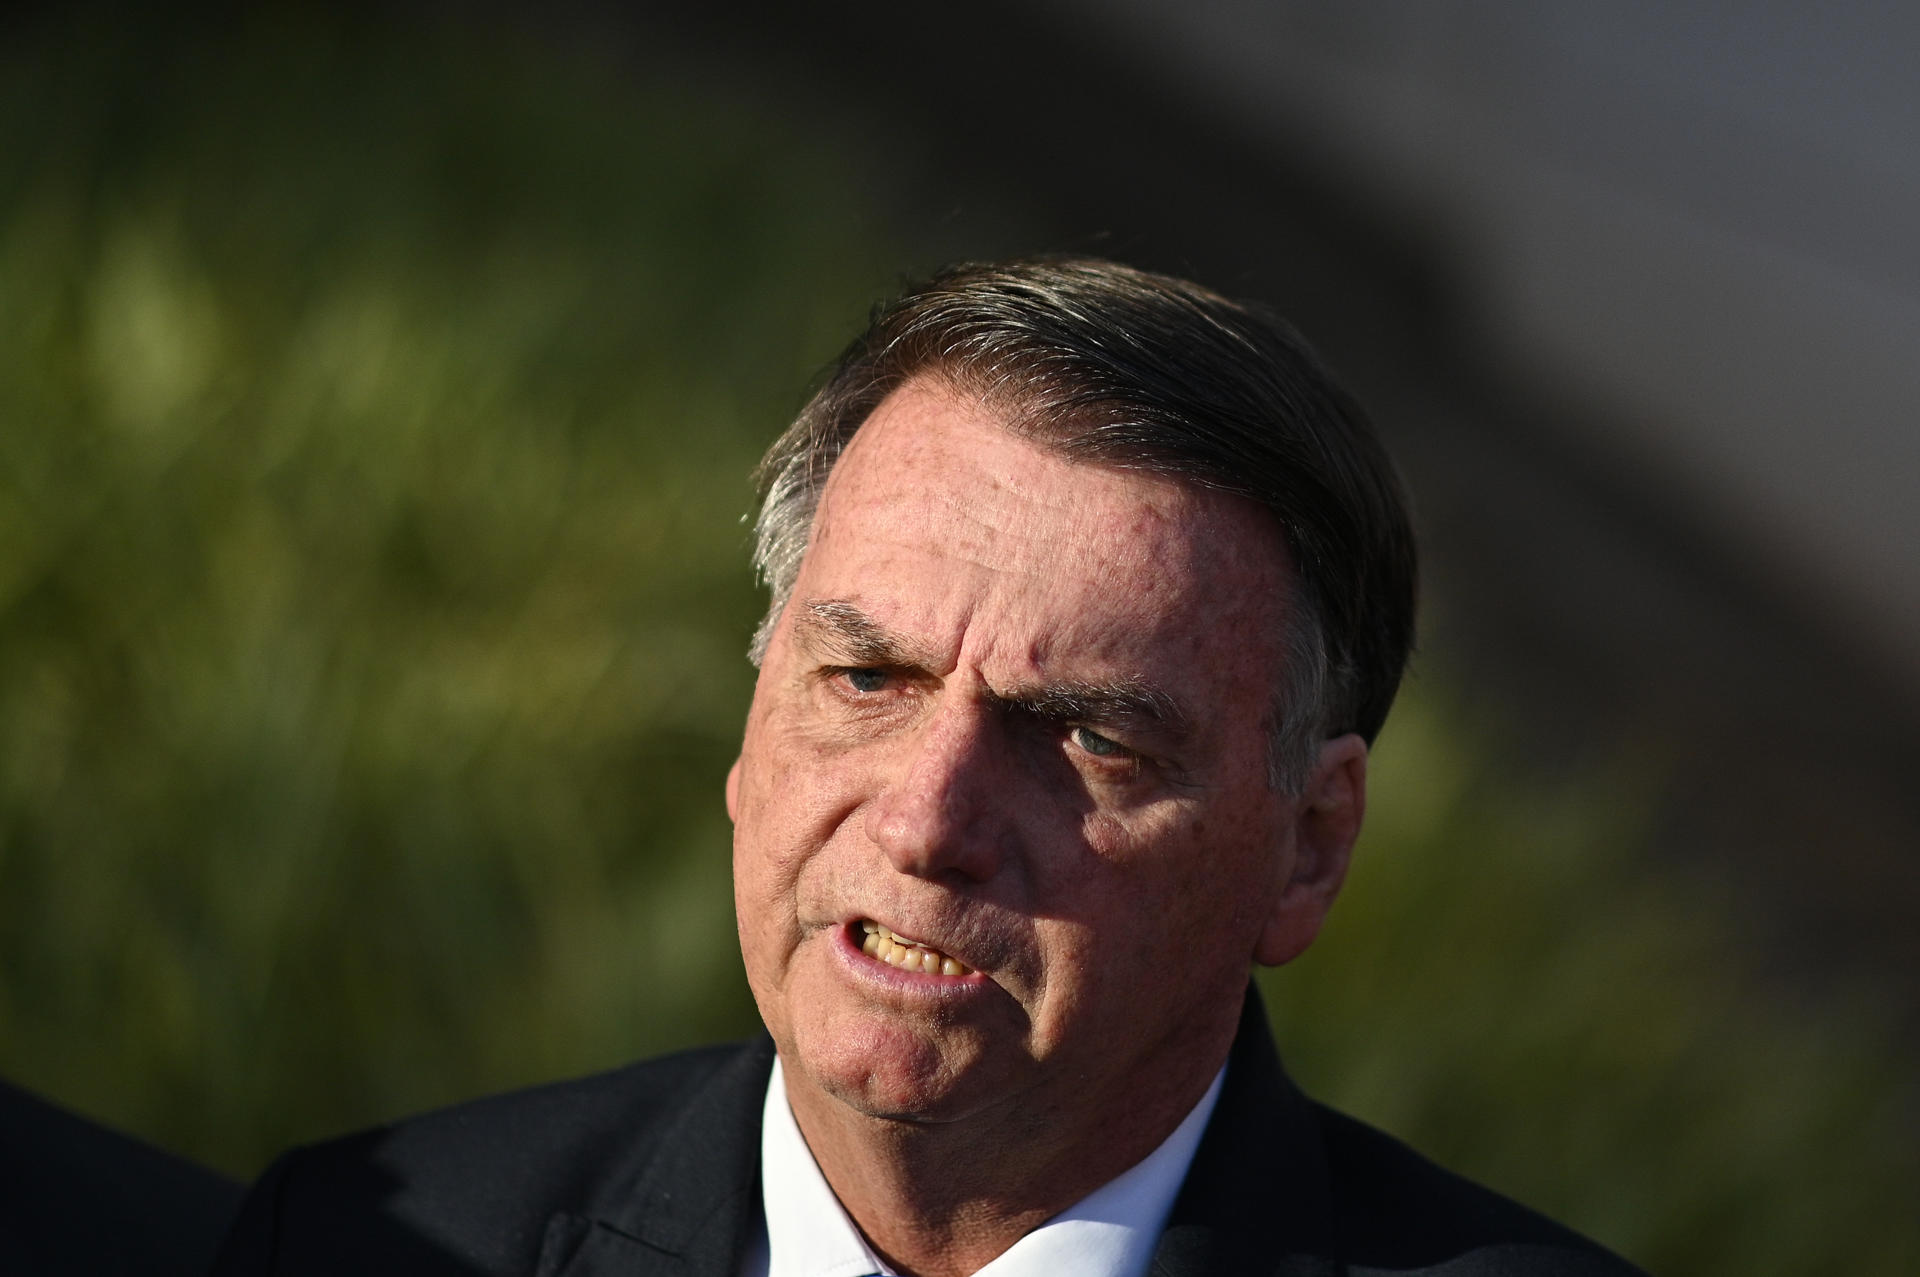 Former President Jair Bolsonaro talks to reporters outside Brazilian Federal Palace headquarters in Brasilia on 12 July 2023. EFE/Andre Borges